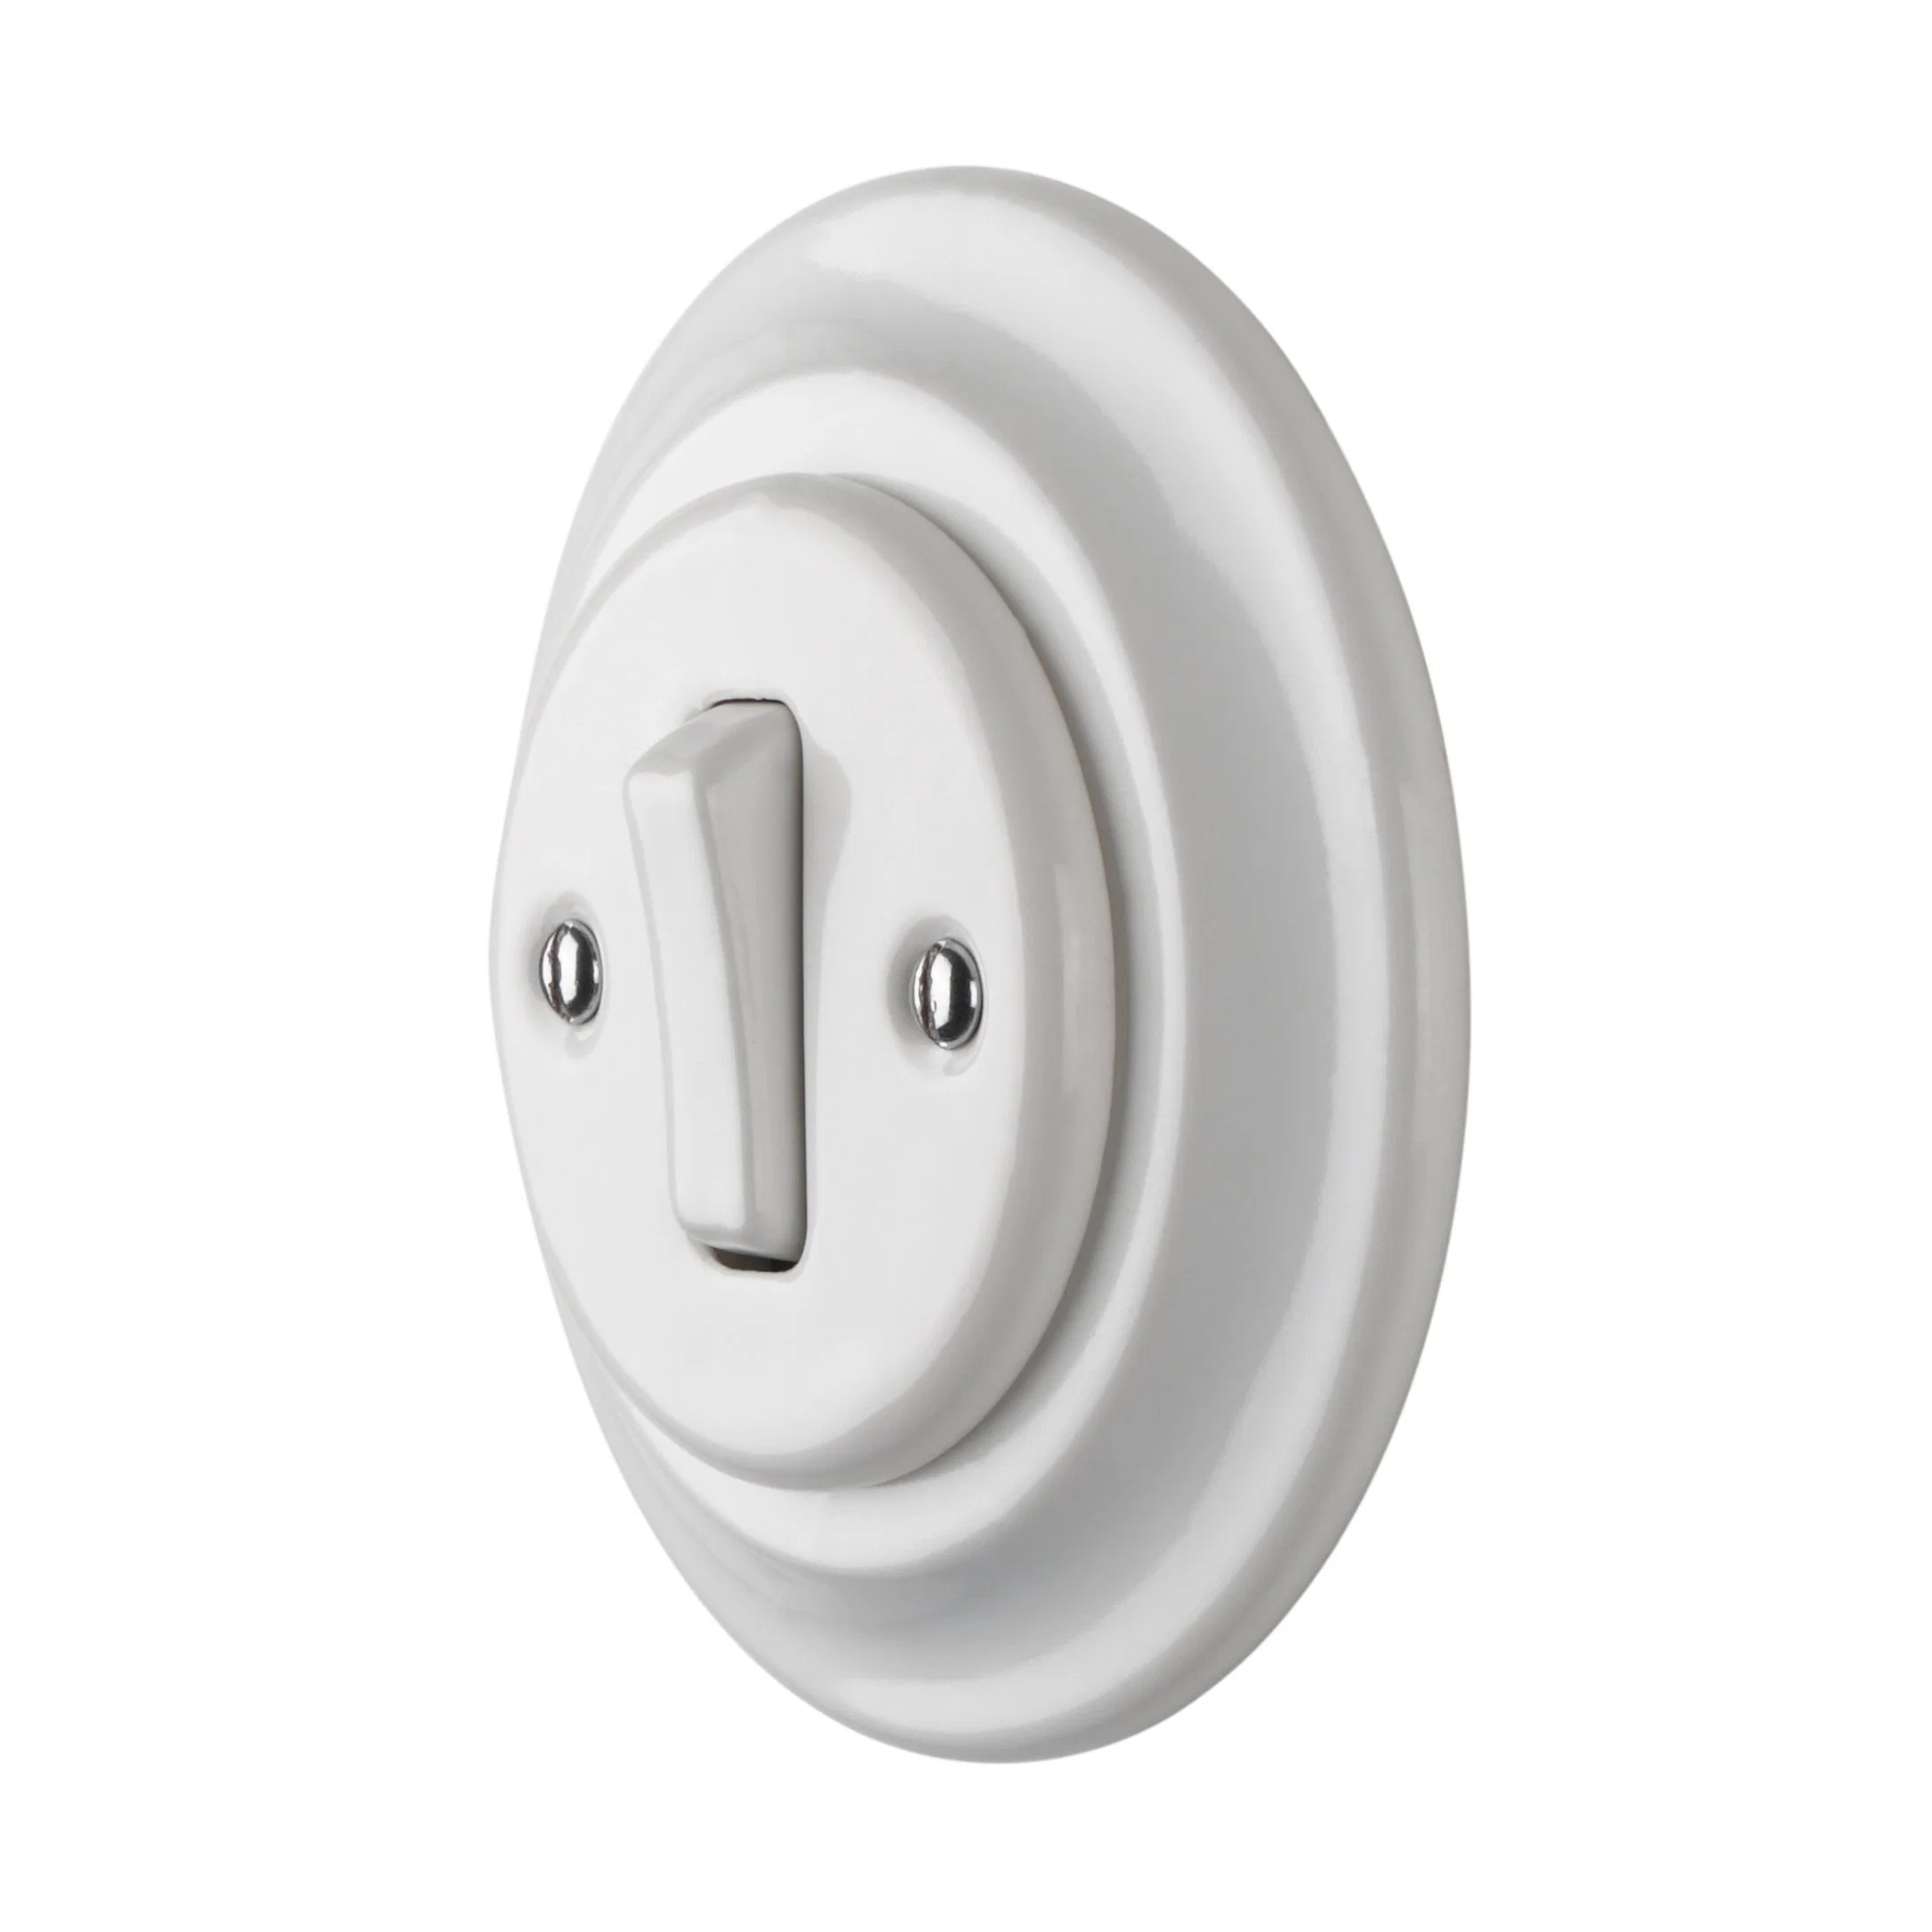 Convenient and Durable Porcelain Vintage Button Bell Switch for Controlling Pendant Lights Keruida Ceramic